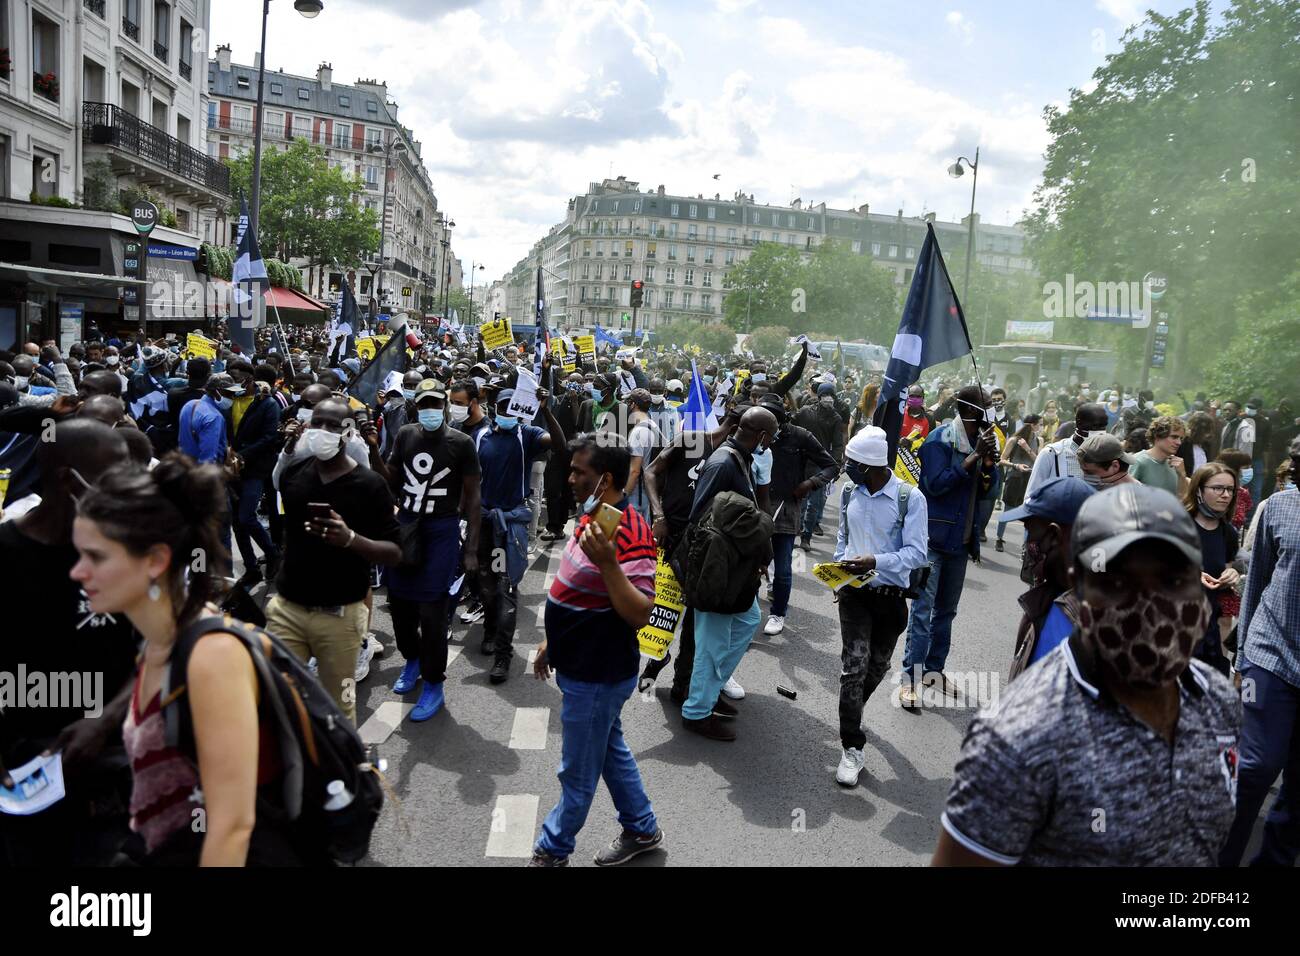 Illegal migrants demonstrate in Paris, France on June 20, 2020 asking for their regularization. Photo by Ait Adjedjou Karim/ABACAPRESS.COM Stock Photo